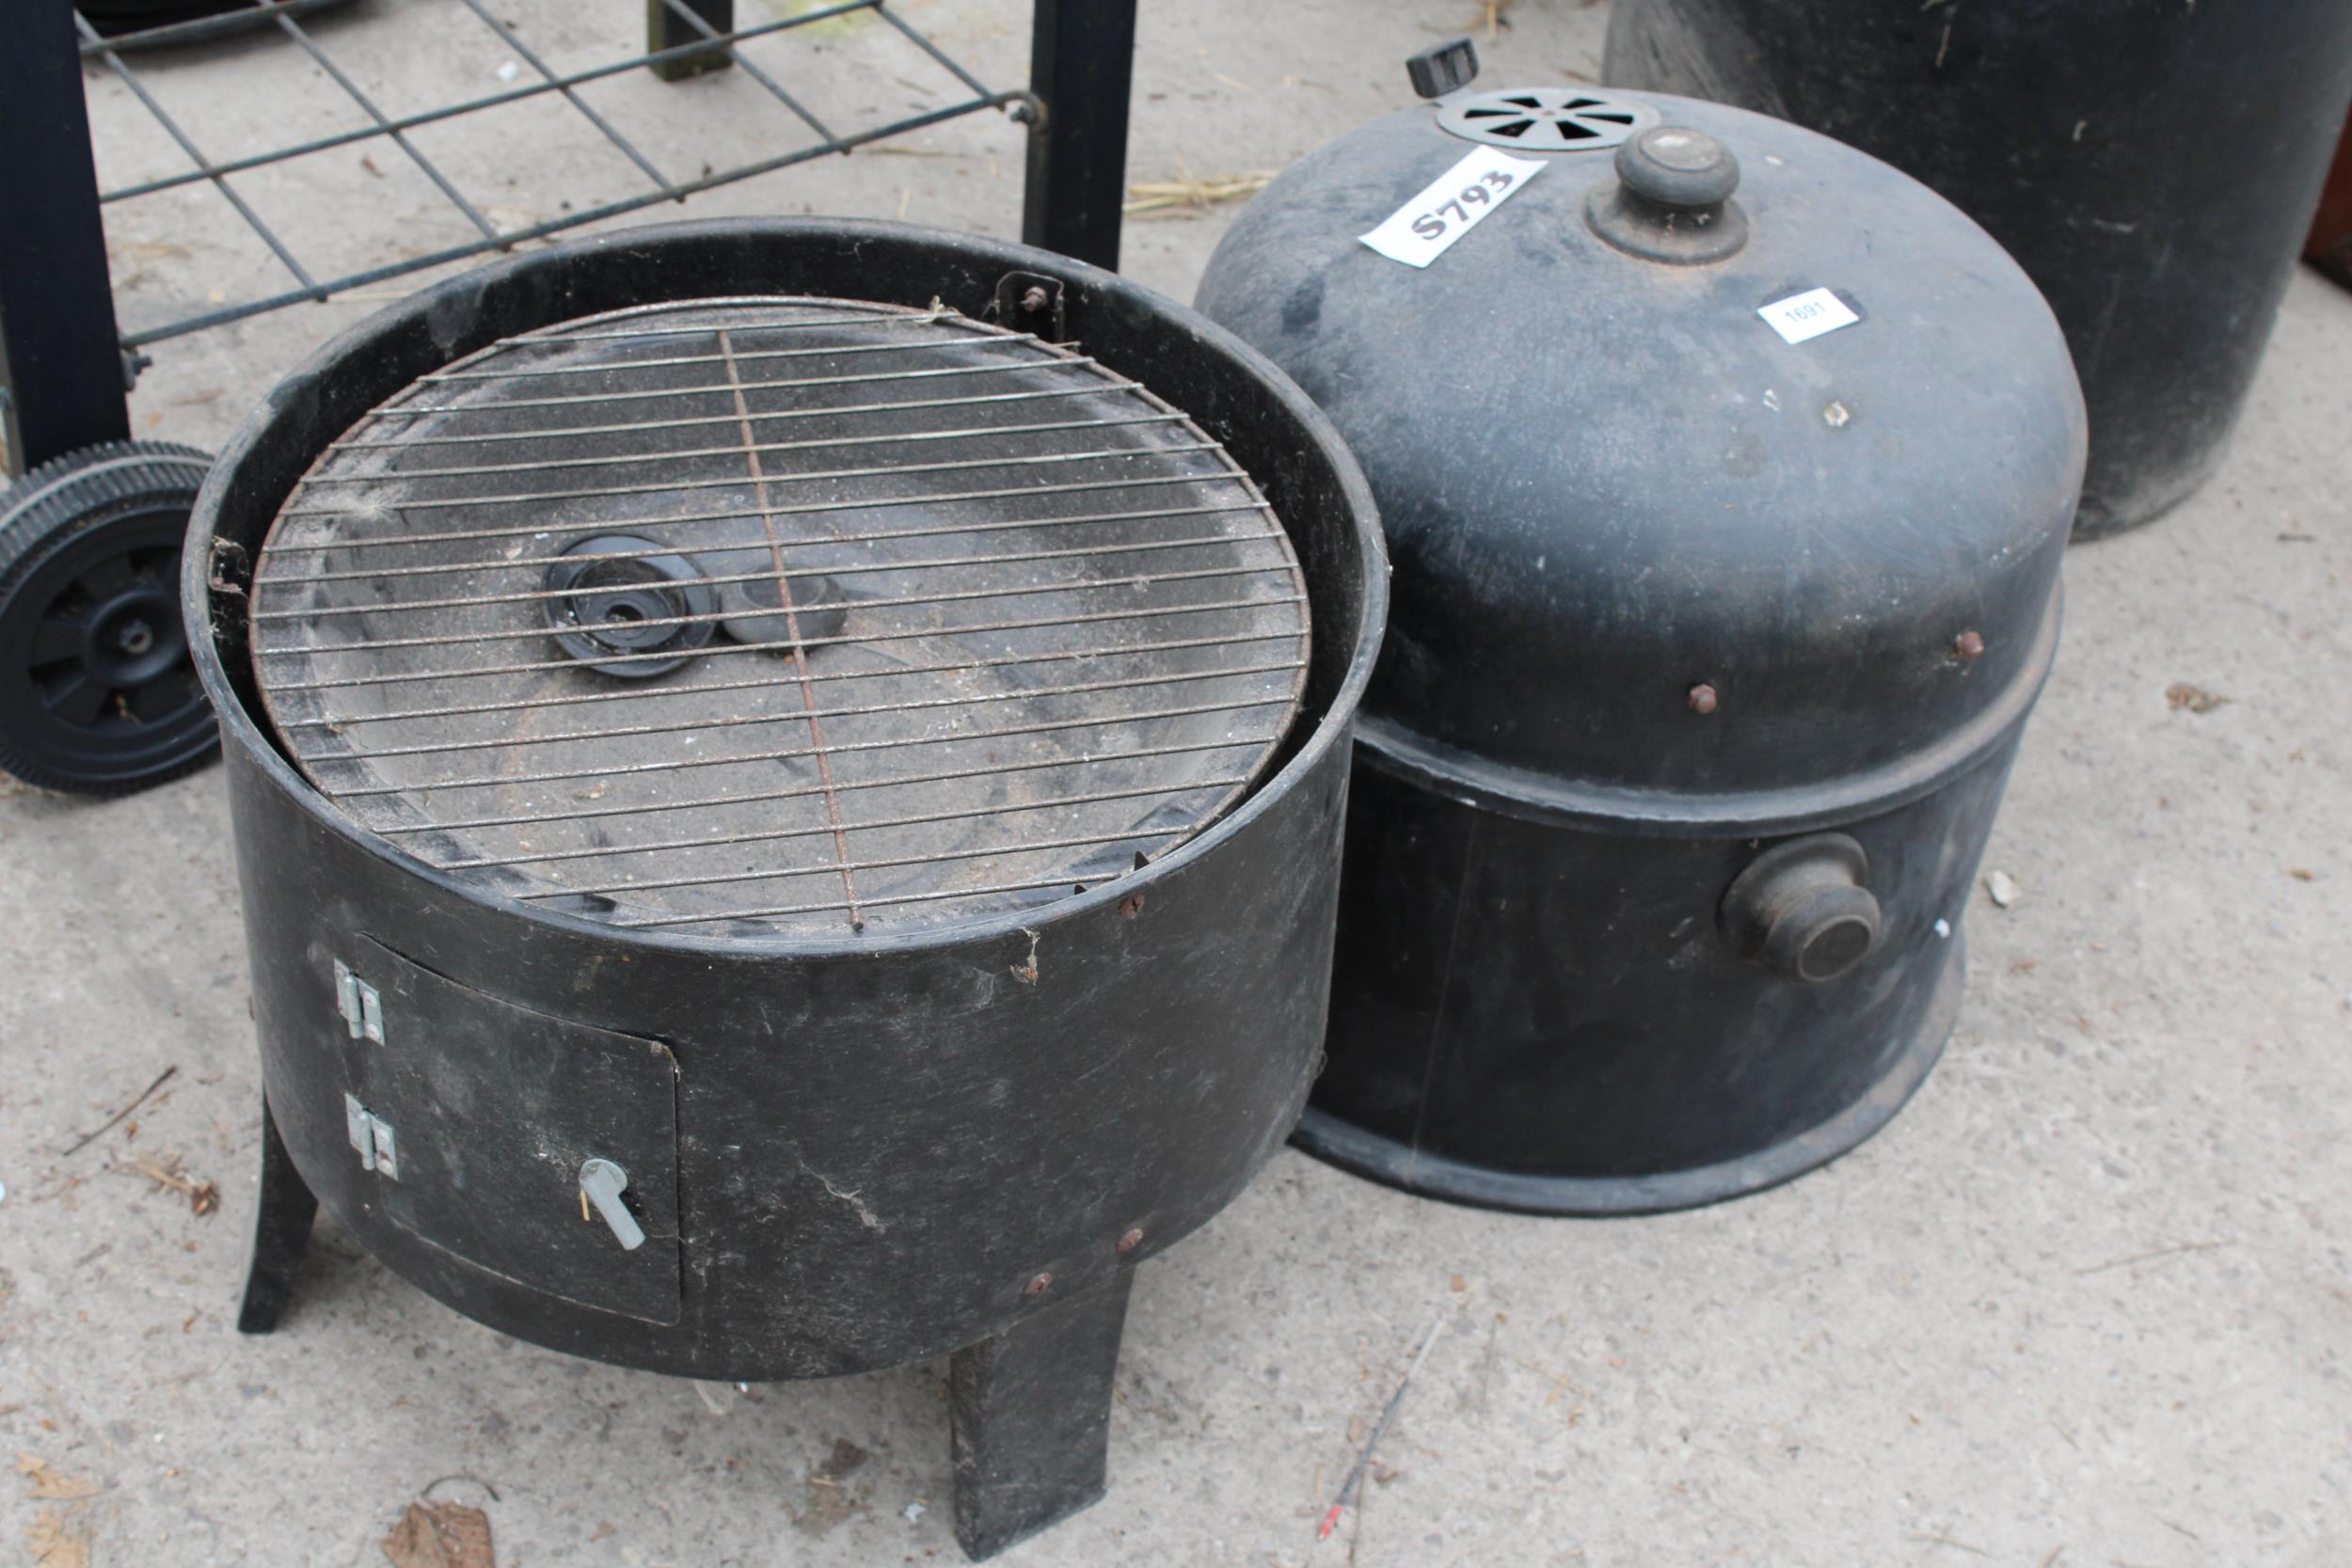 TWO CHARCOAL BBQS TO INCLUDE ONE WITH A TROLLEY - Image 2 of 2